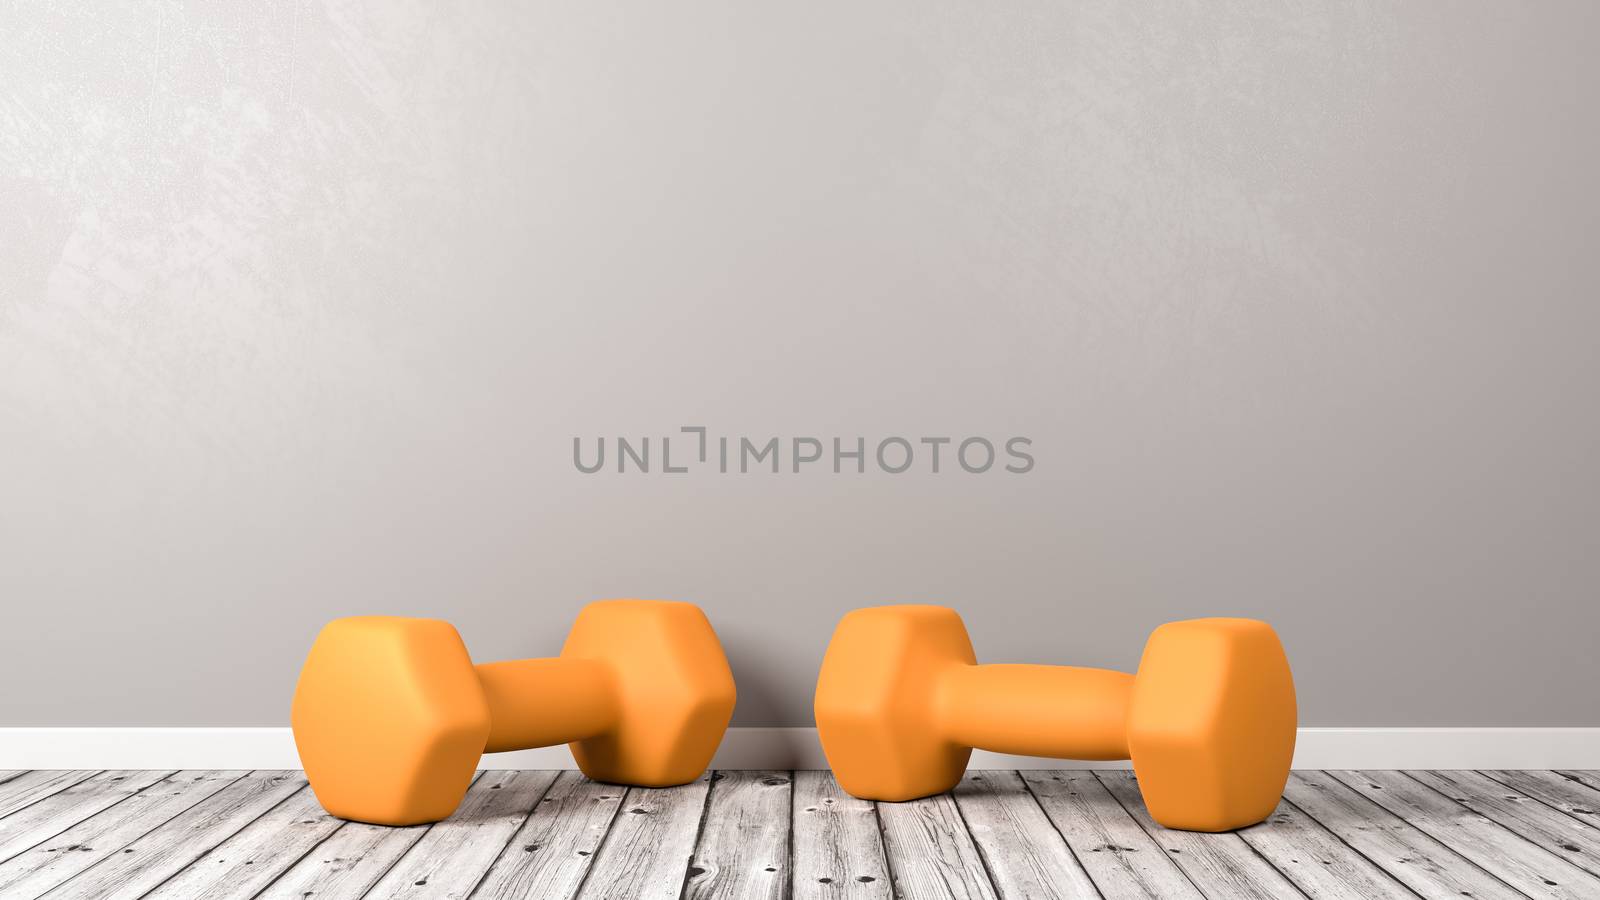 Two Orange Dumbbells on Wooden Floor in a Gray Wall Room with Copy Space 3D Illustration